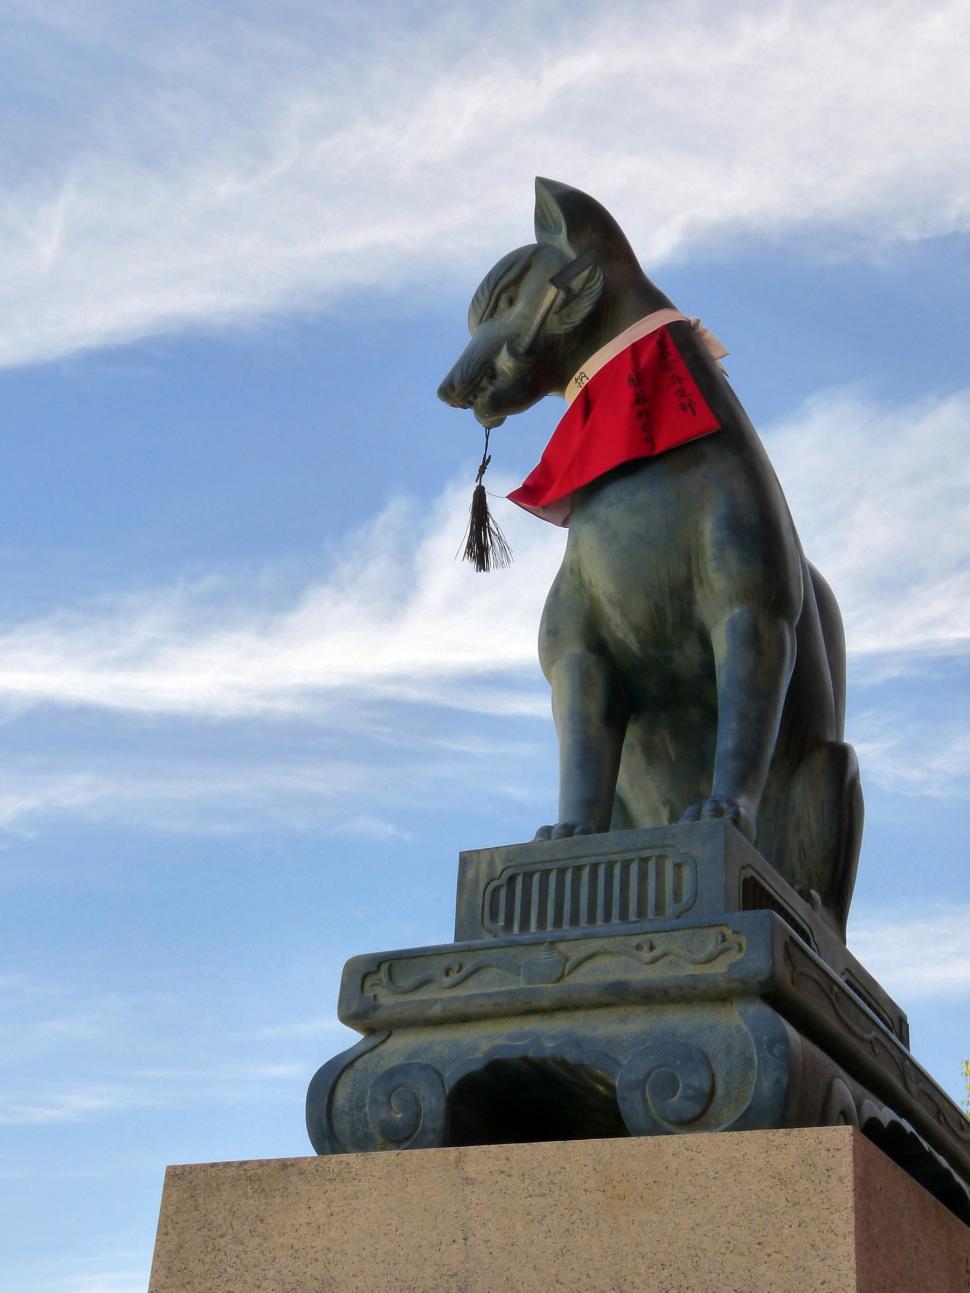 Free Image of Statue of a Dog on Top of a Building 